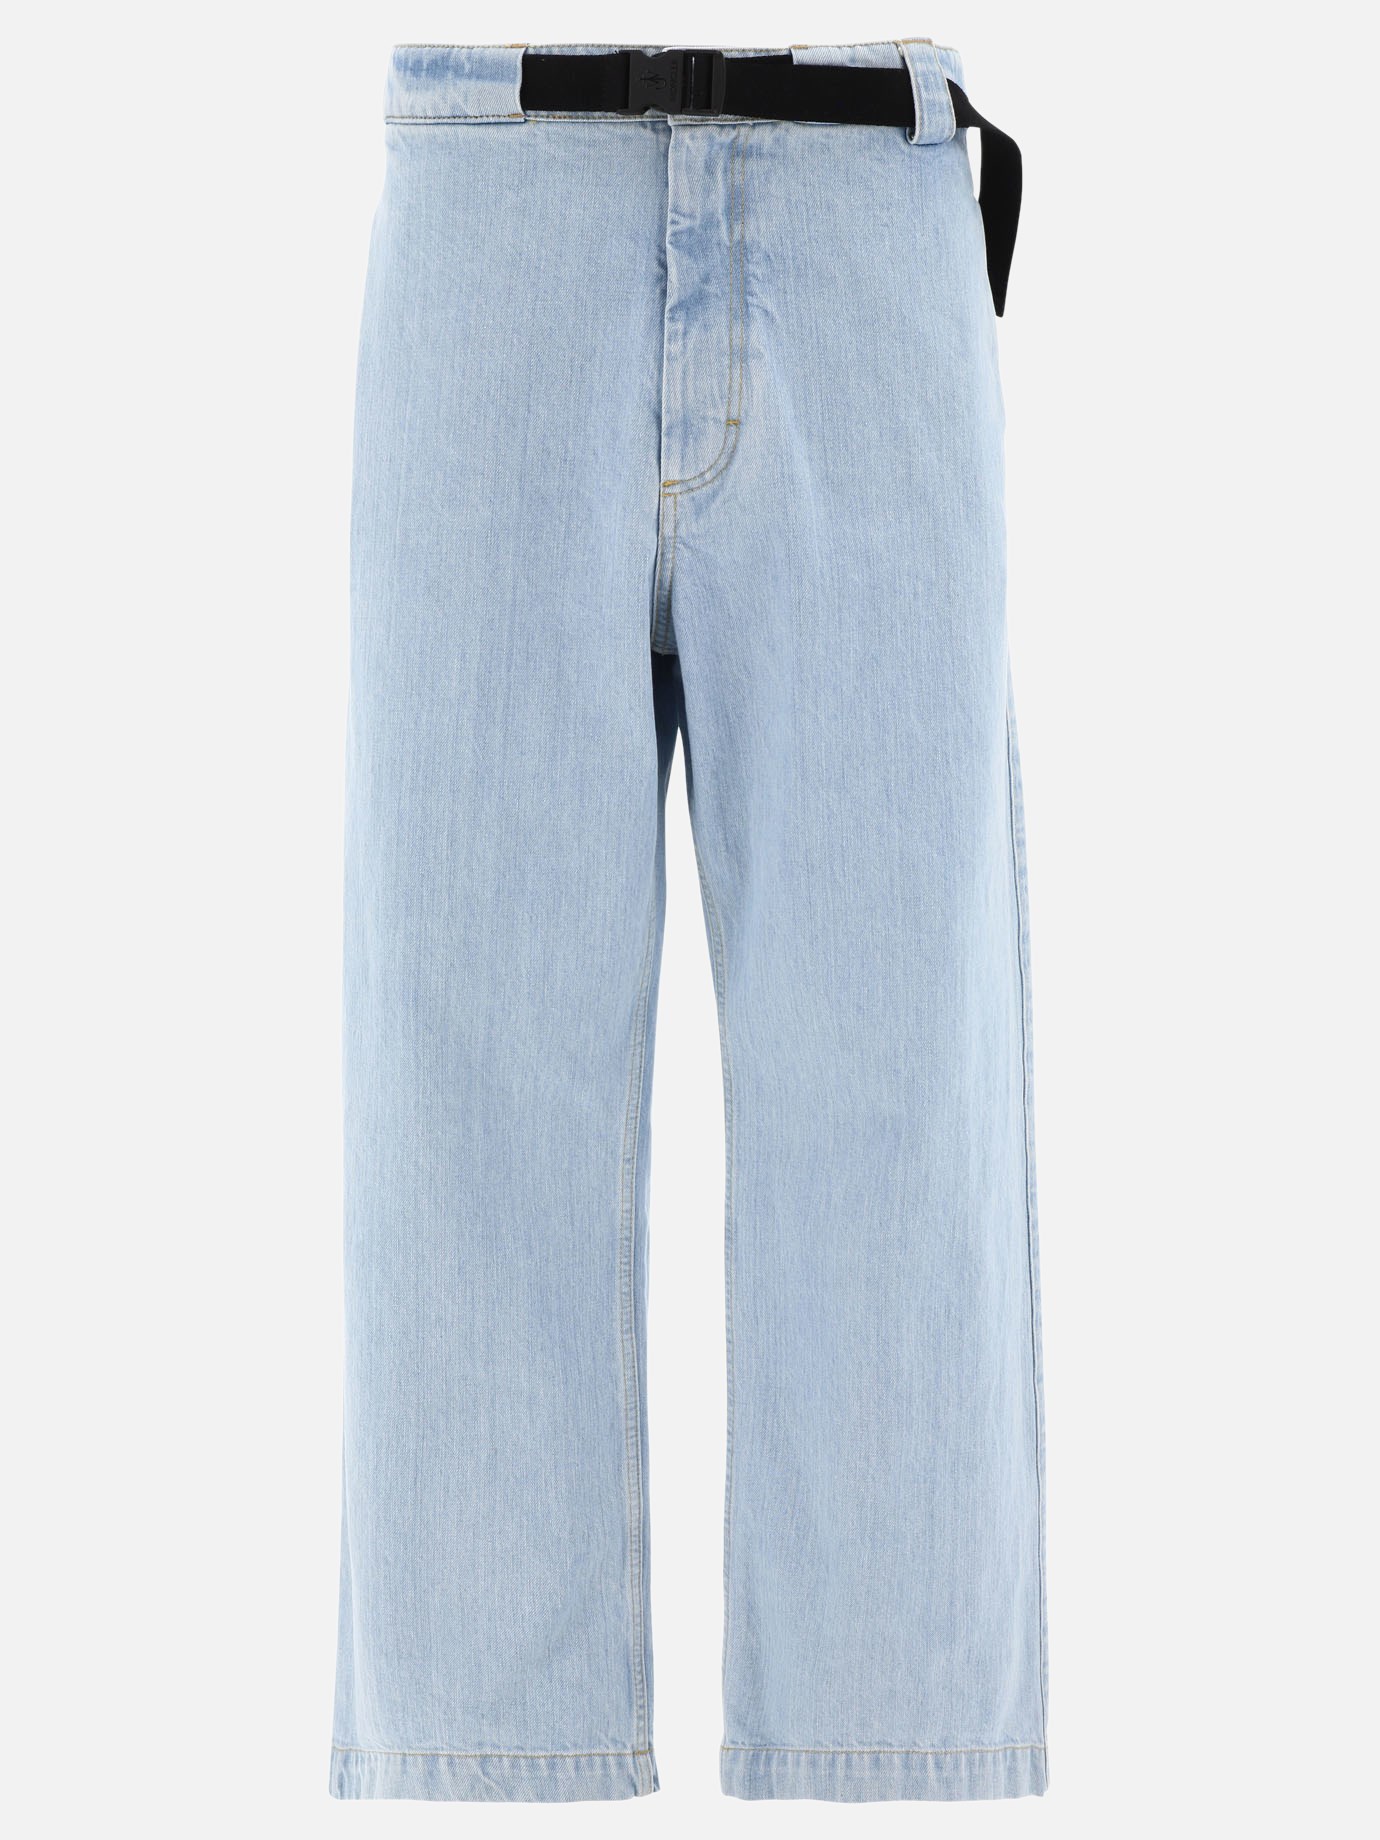 Jeans JW Anderson by Moncler Genius - 0